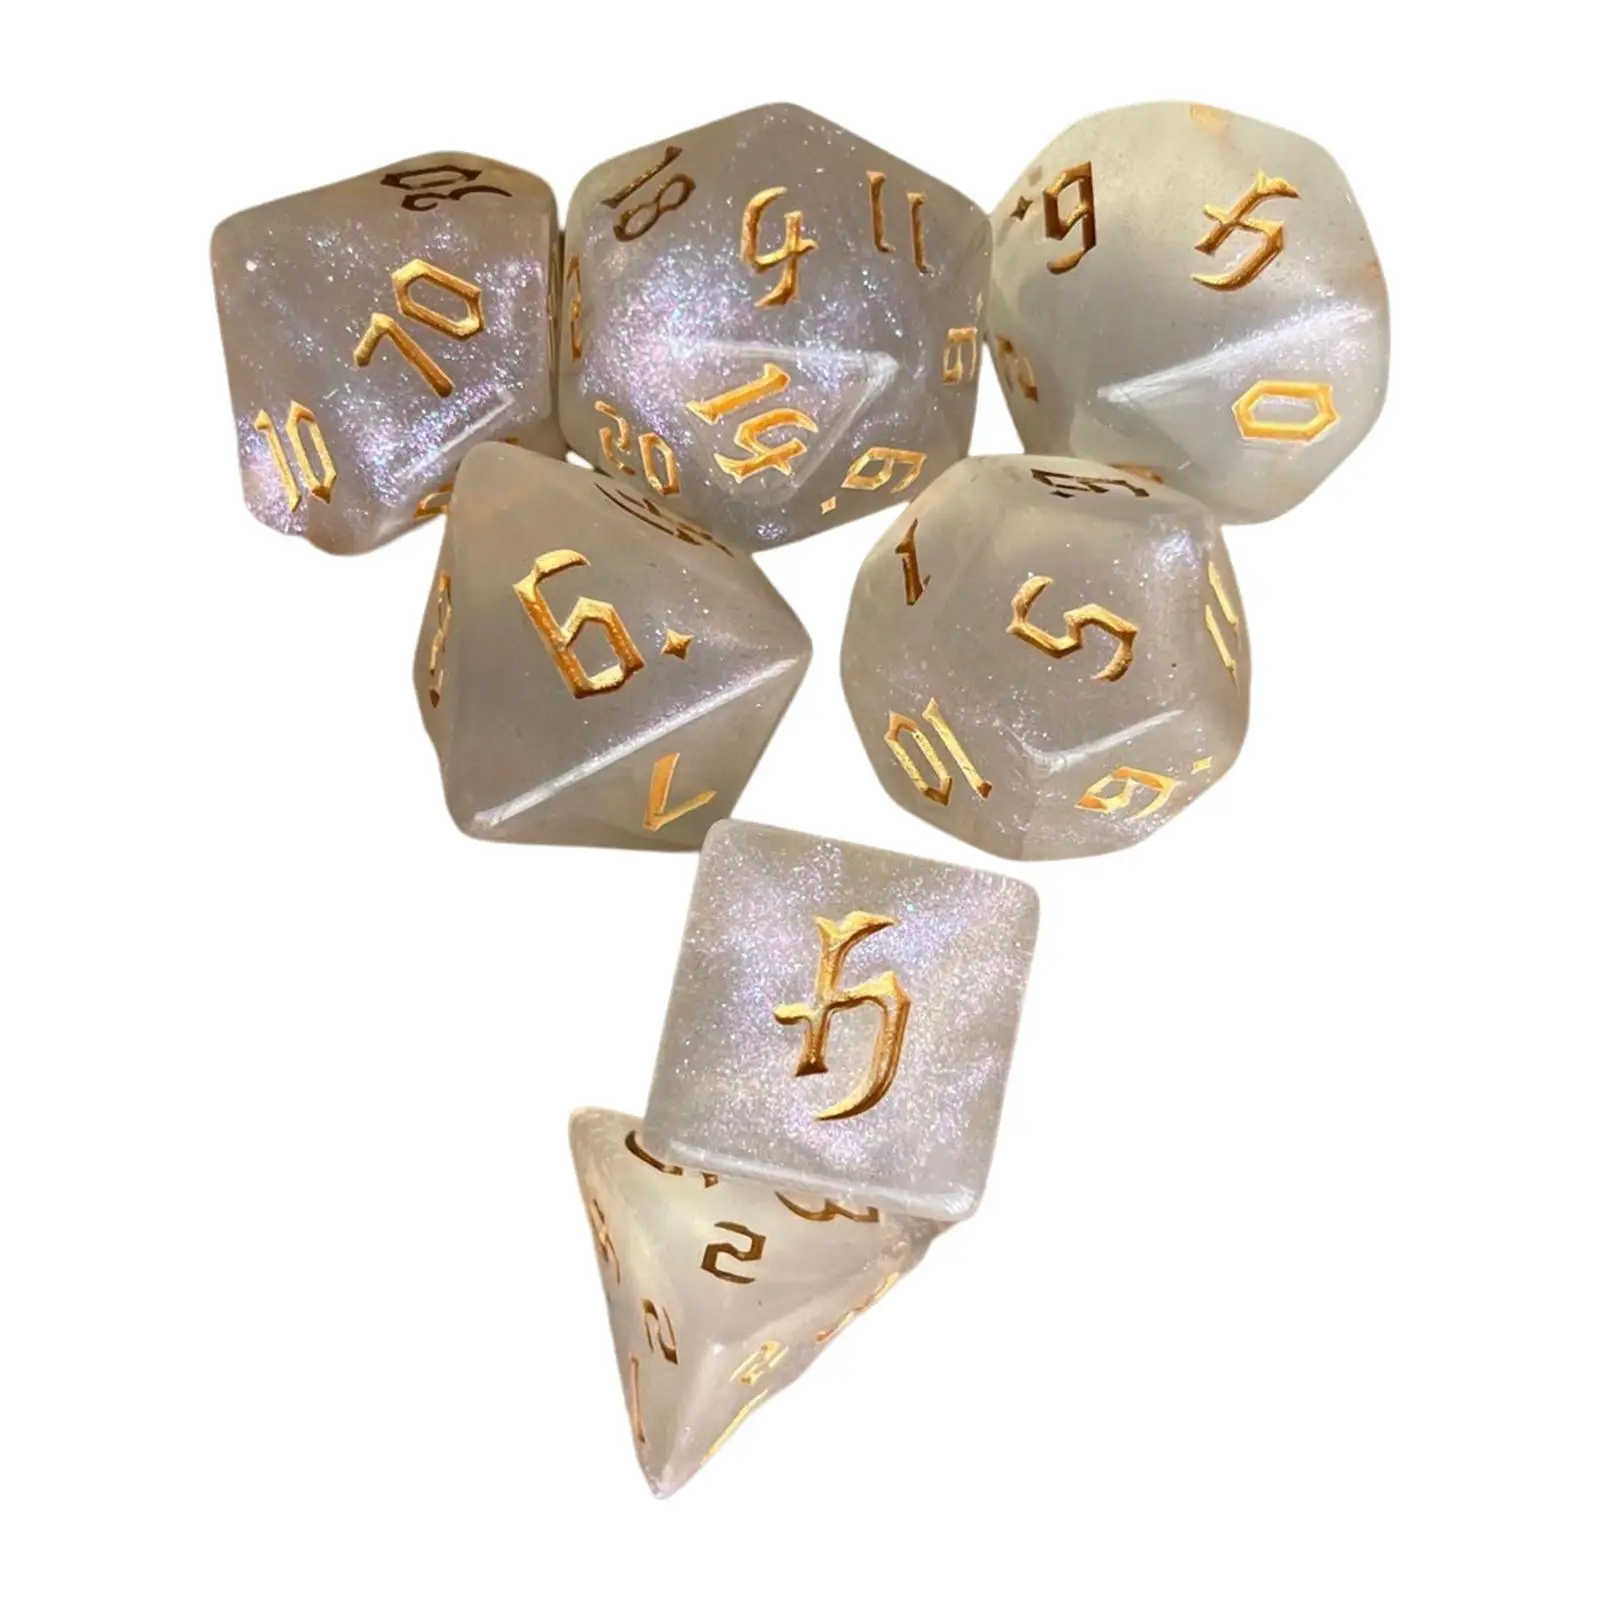 7x Polyhedral Dices Set Transparent Multipurpose Entertainment Toy D8 D10 D12 D20 Engraved Game Dices for Board Game Props KTV